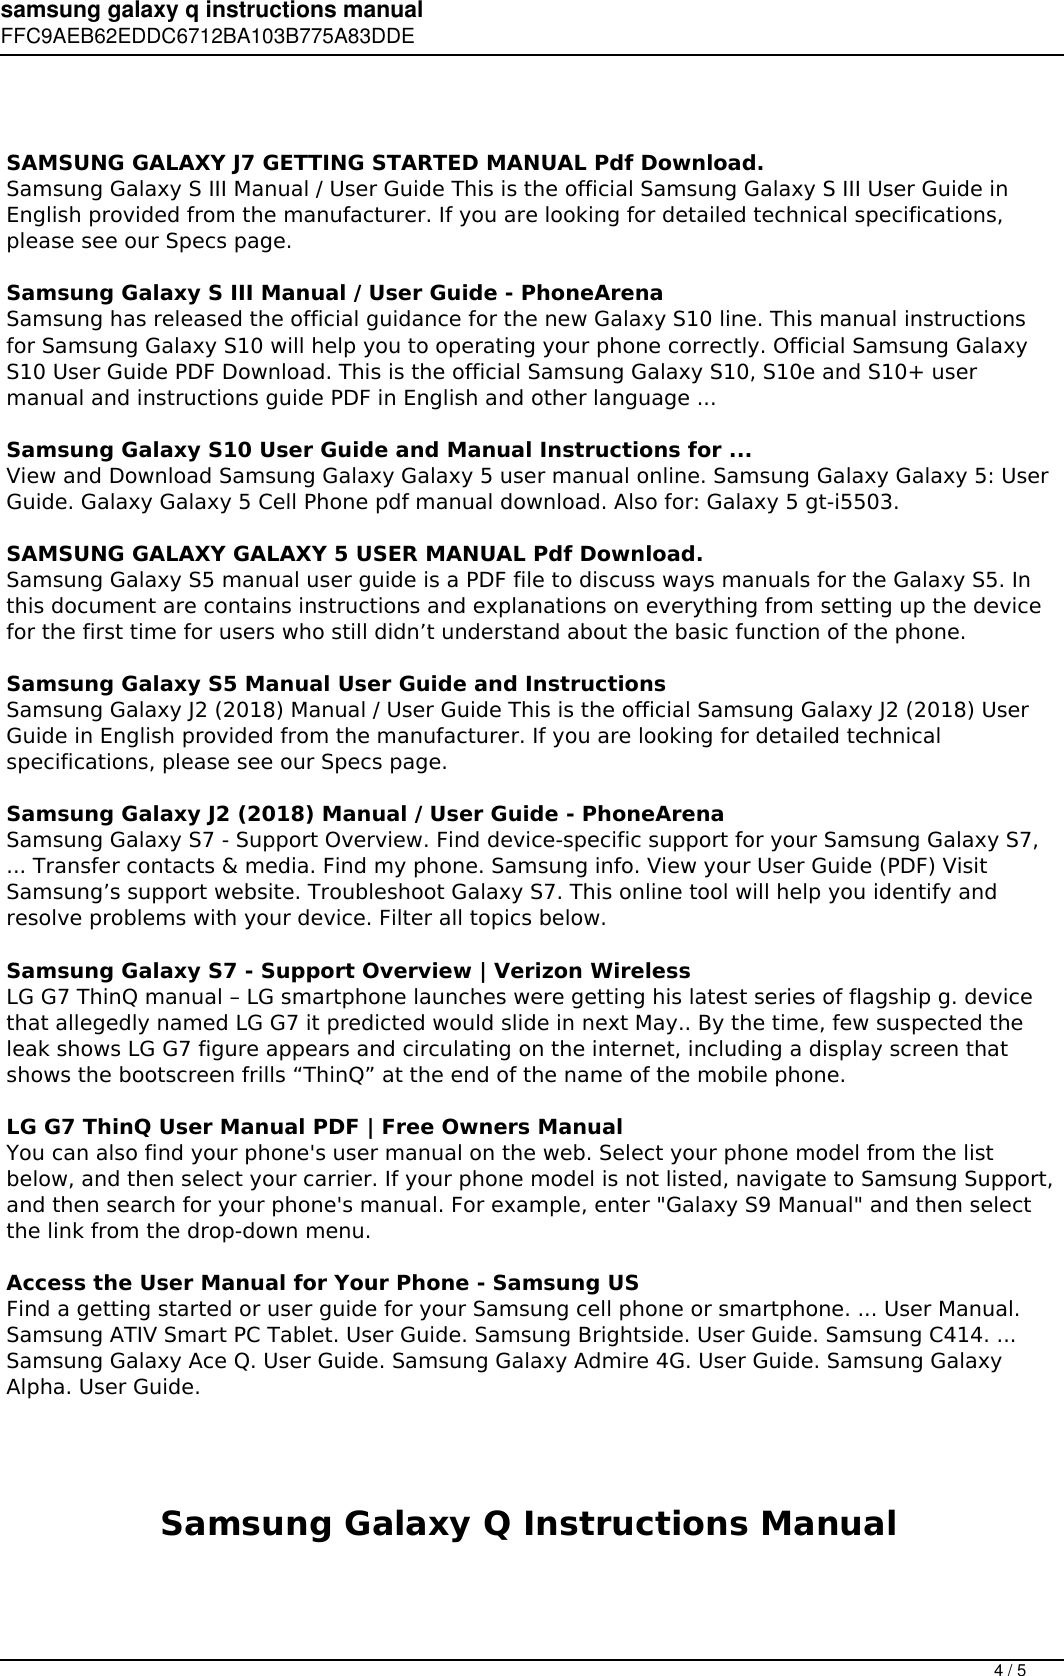 Page 4 of 5 - Samsung Galaxy Q Instructions Manual